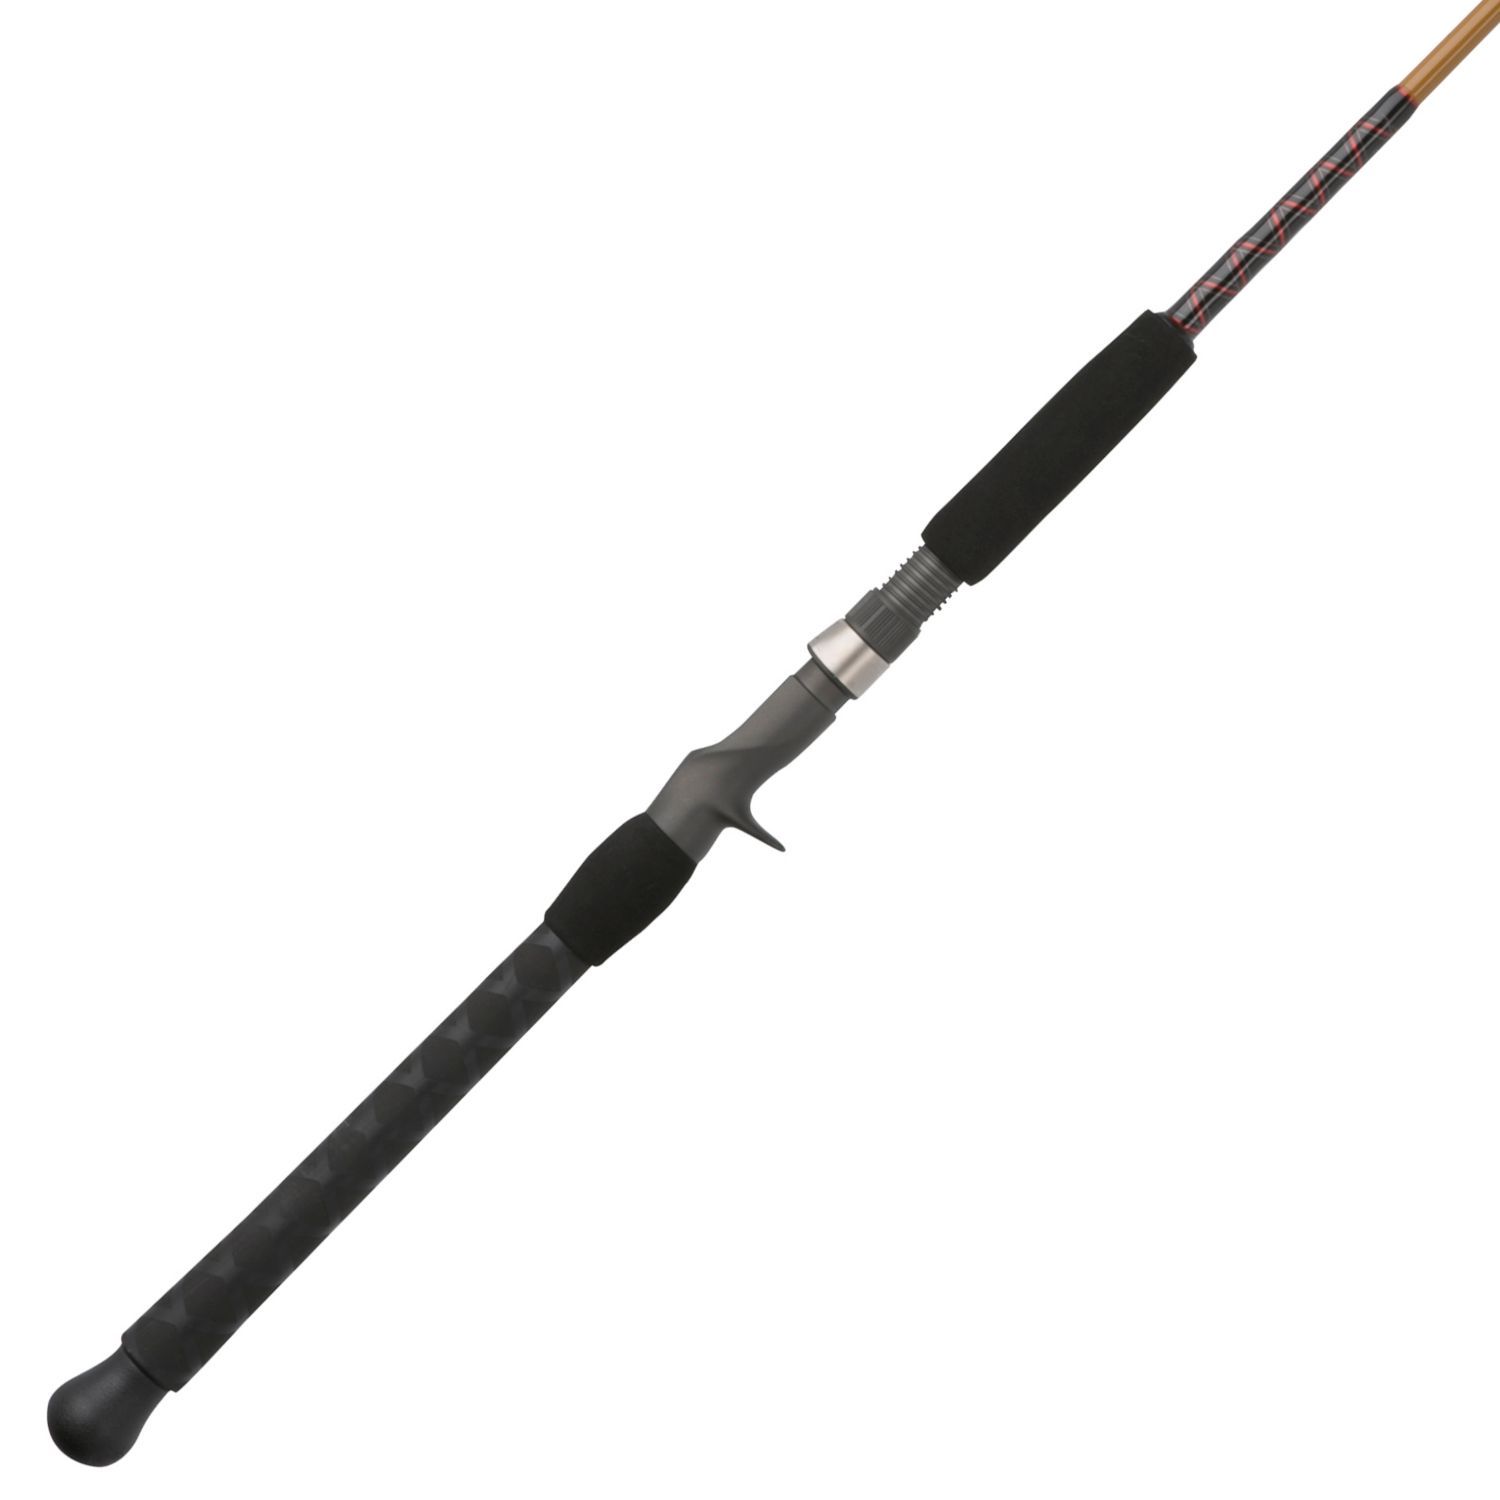 7 FOOT SHAKESPEARE POLE TIGER CASTING FISHING ROD AND REEL COMBO NICE -  general for sale - by owner - craigslist